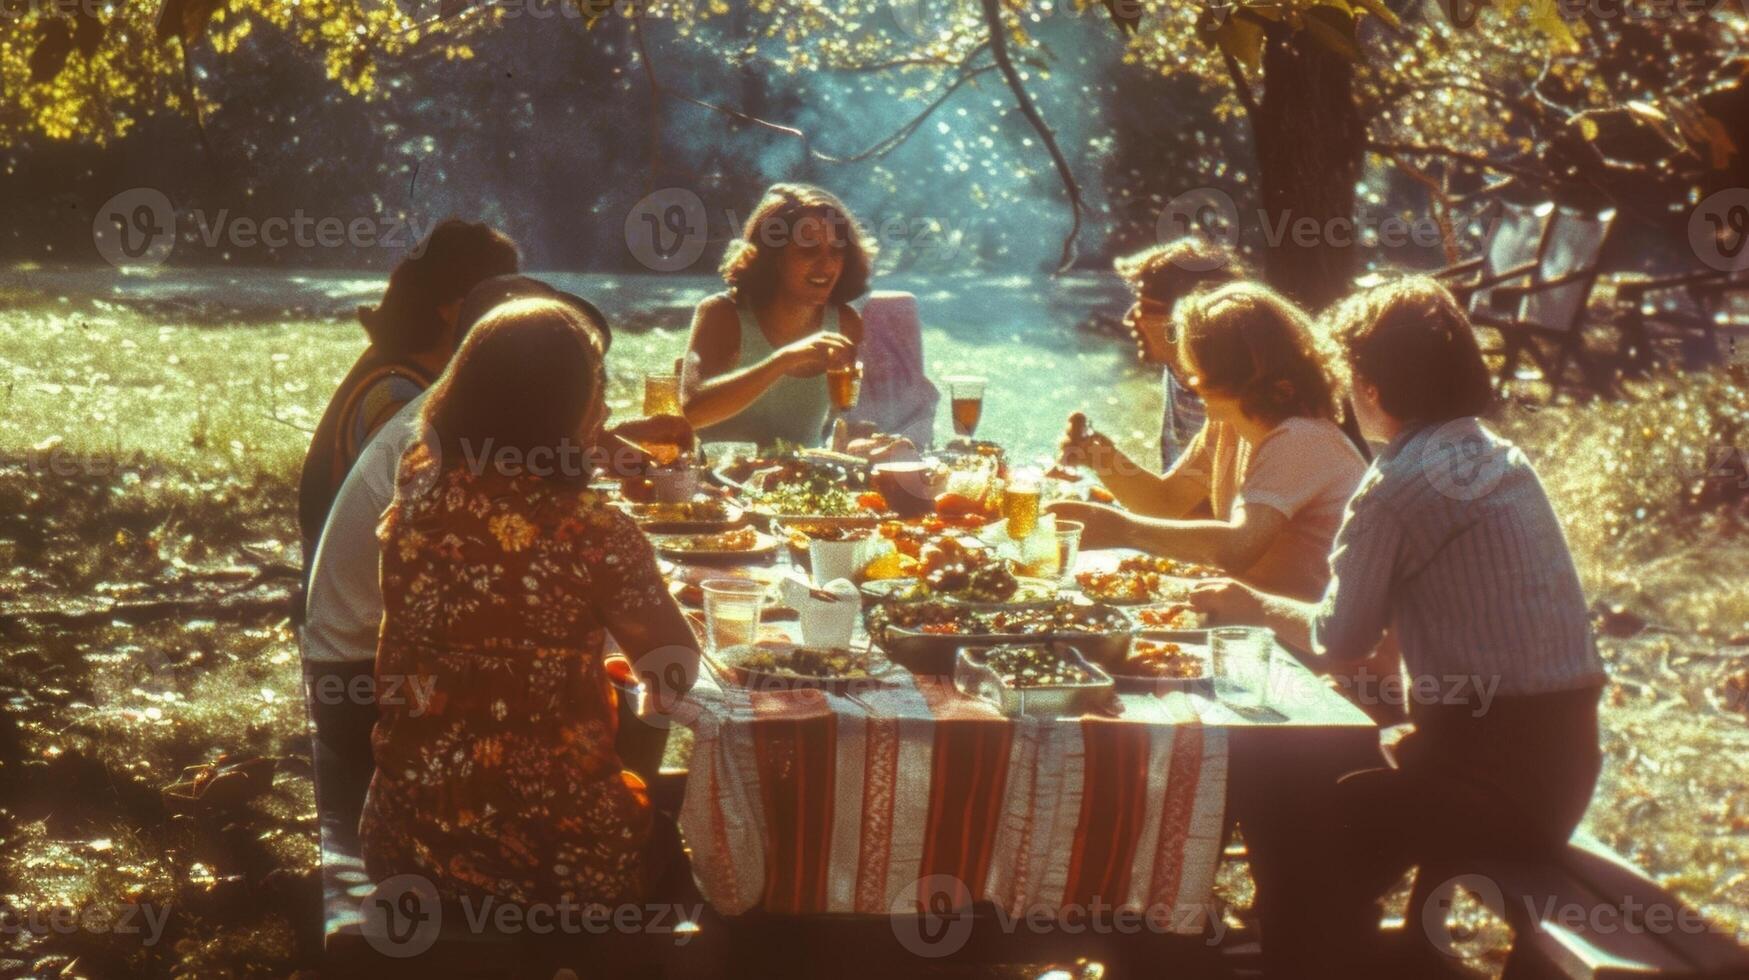 A group of friends gathered around a picnic table sharing stories and making memories over a delicious spread of food photo